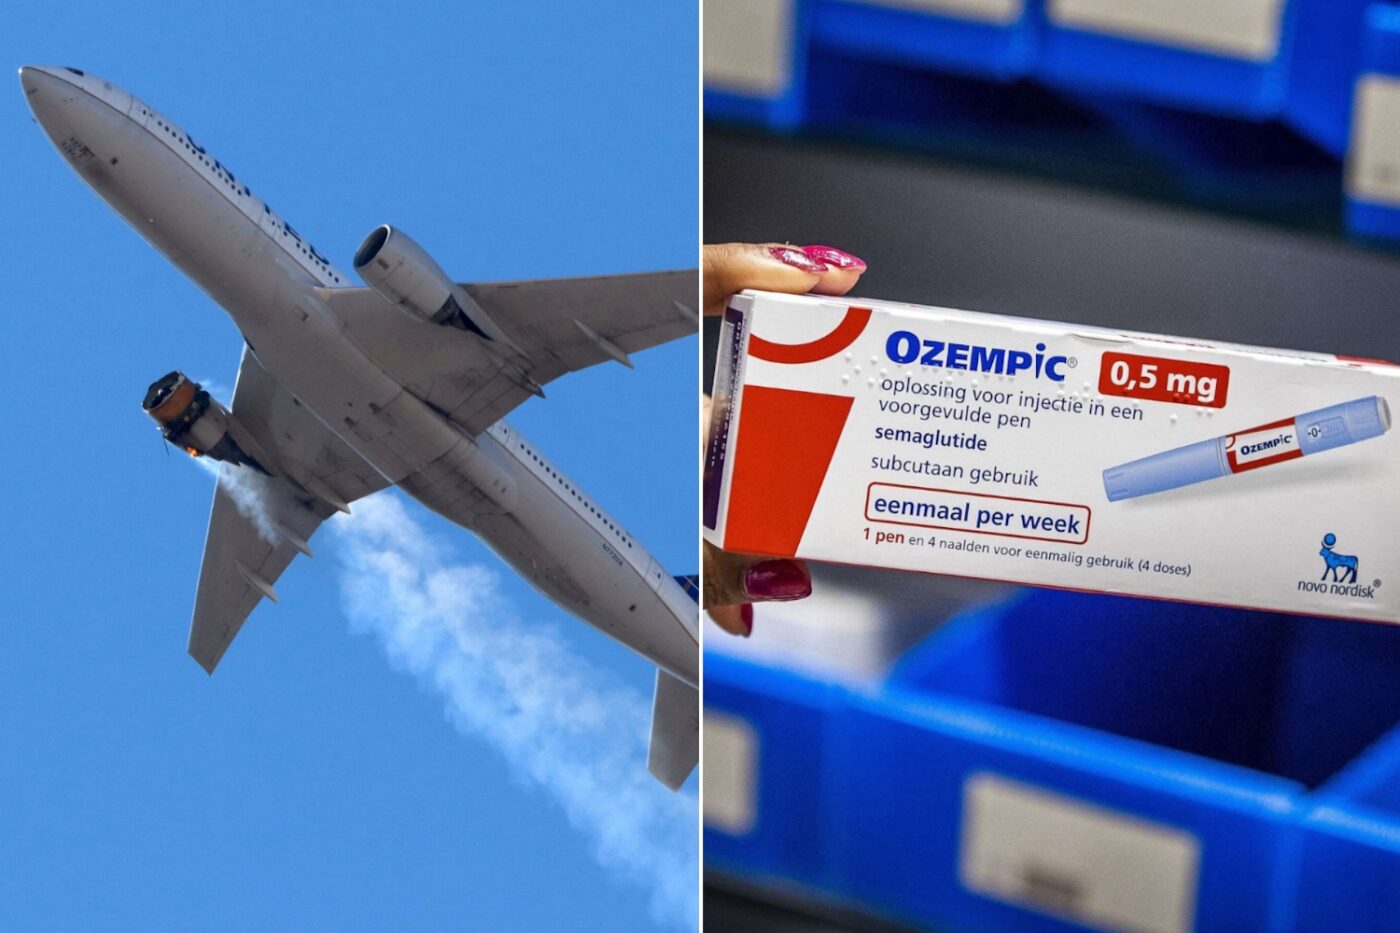 Airlines Could Save Millions With Ozempic-Fuelled Passenger Weight Loss, According To New Report